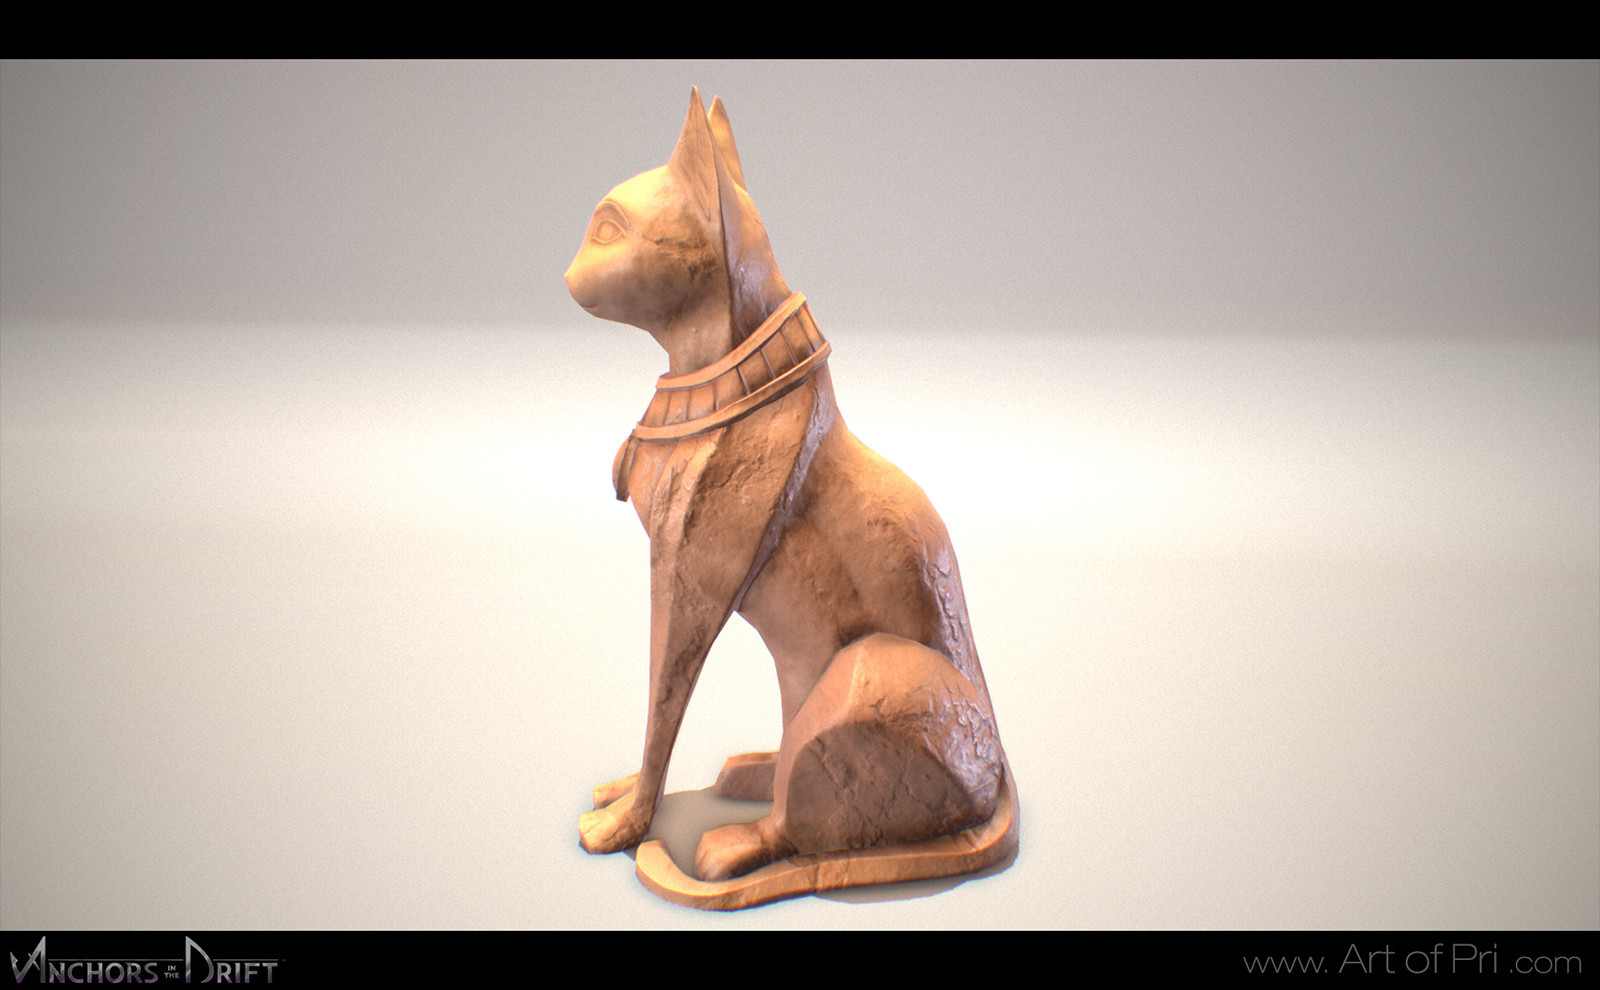 Egyptian Cat Statue
Concept by Ari Bilow
Model by Me